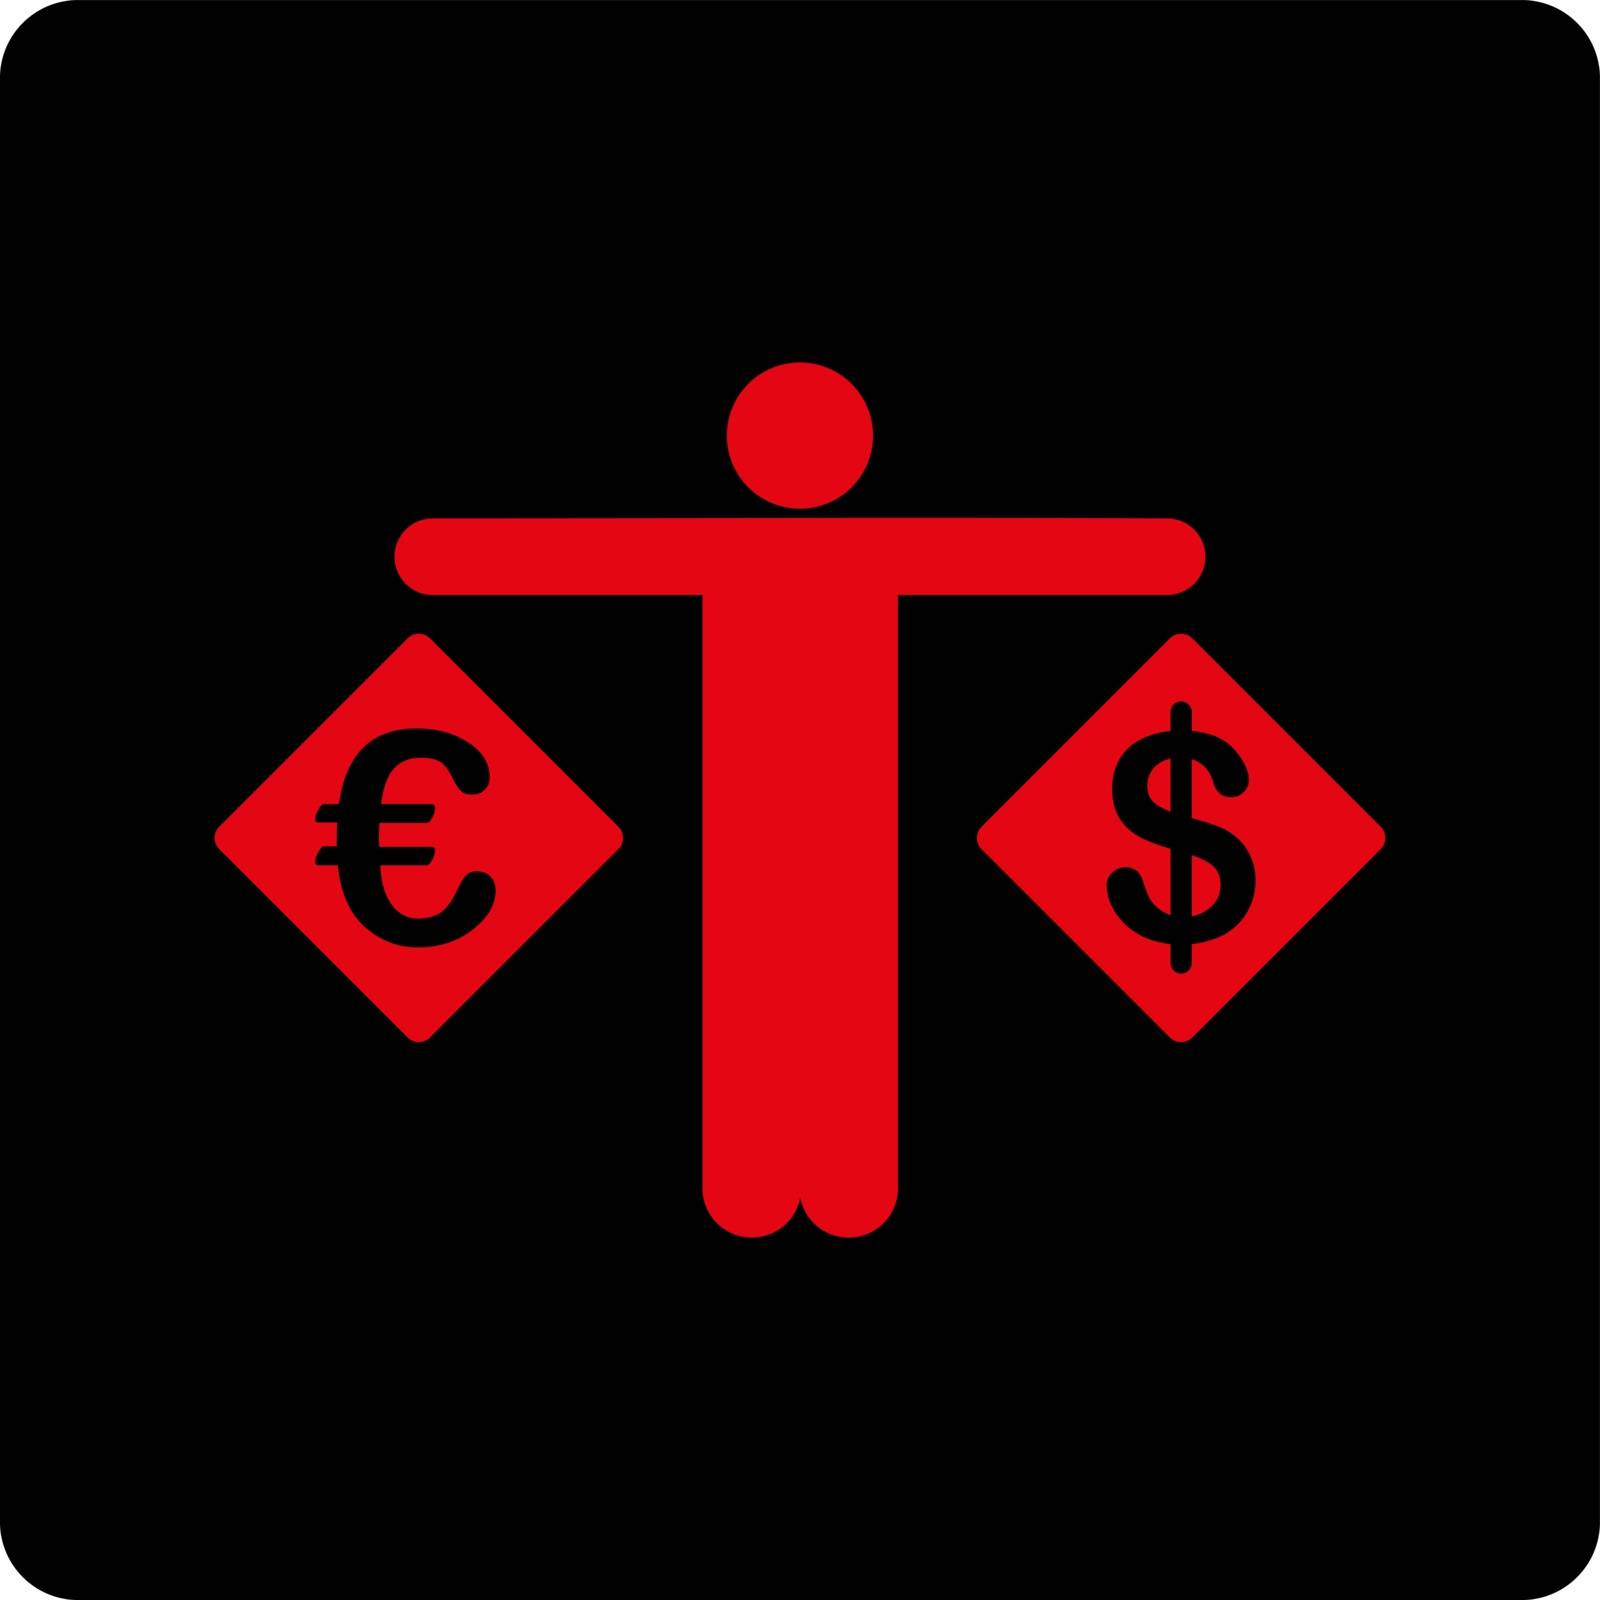 Currency compare icon. Vector style is intensive red and black colors, flat rounded square button on a white background.